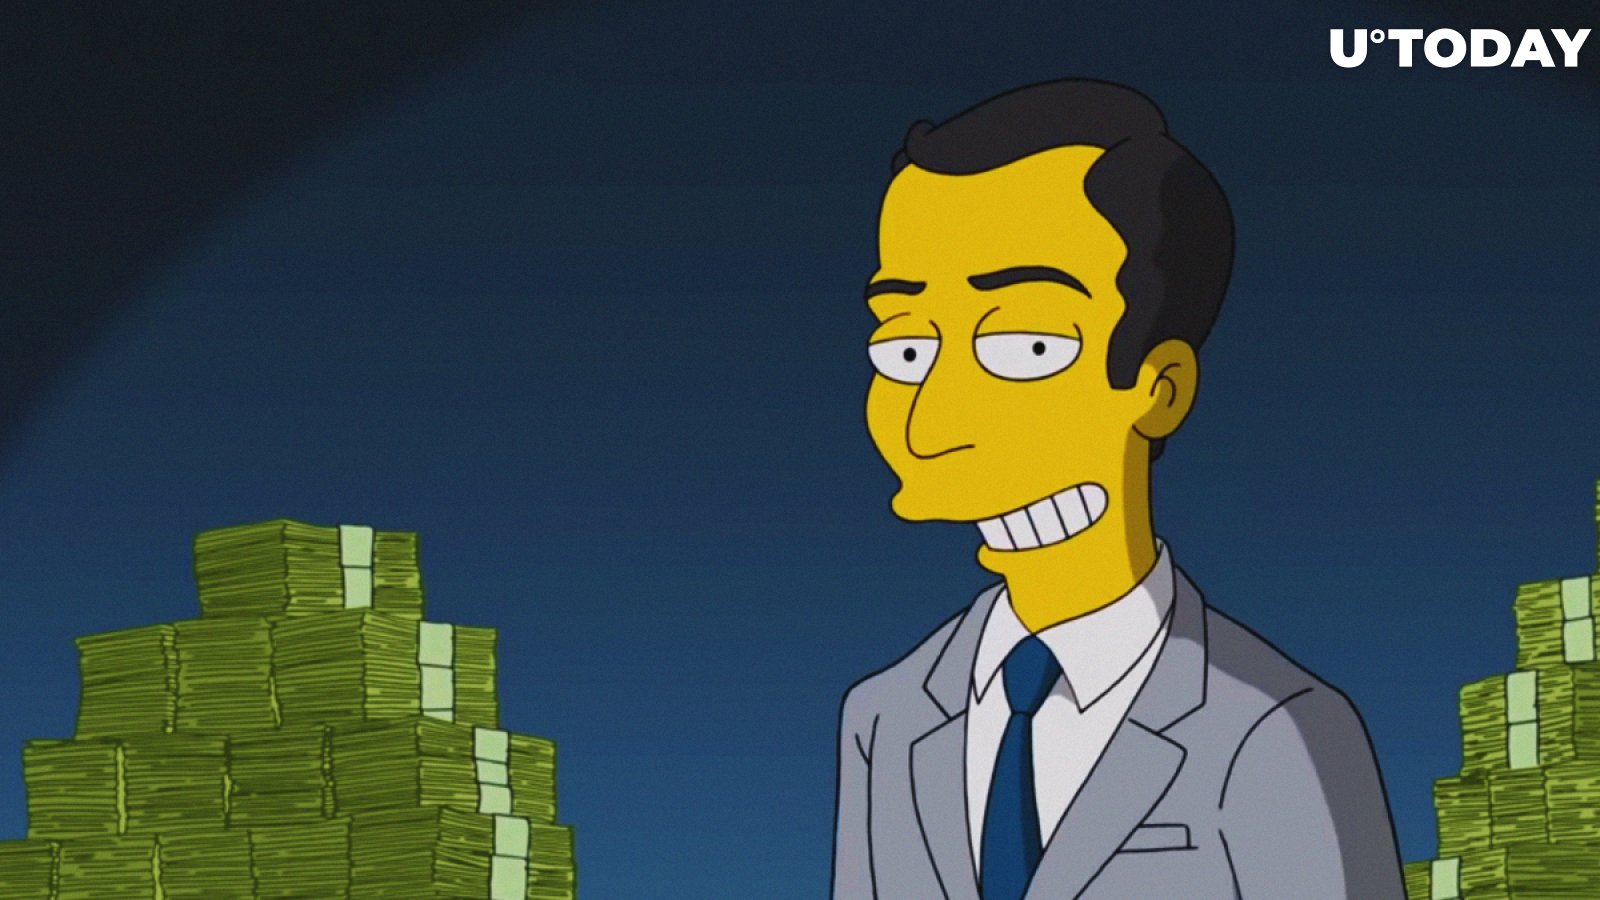 Crypto and Blockchain Explained in 'The Simpsons' Episode: WATCH